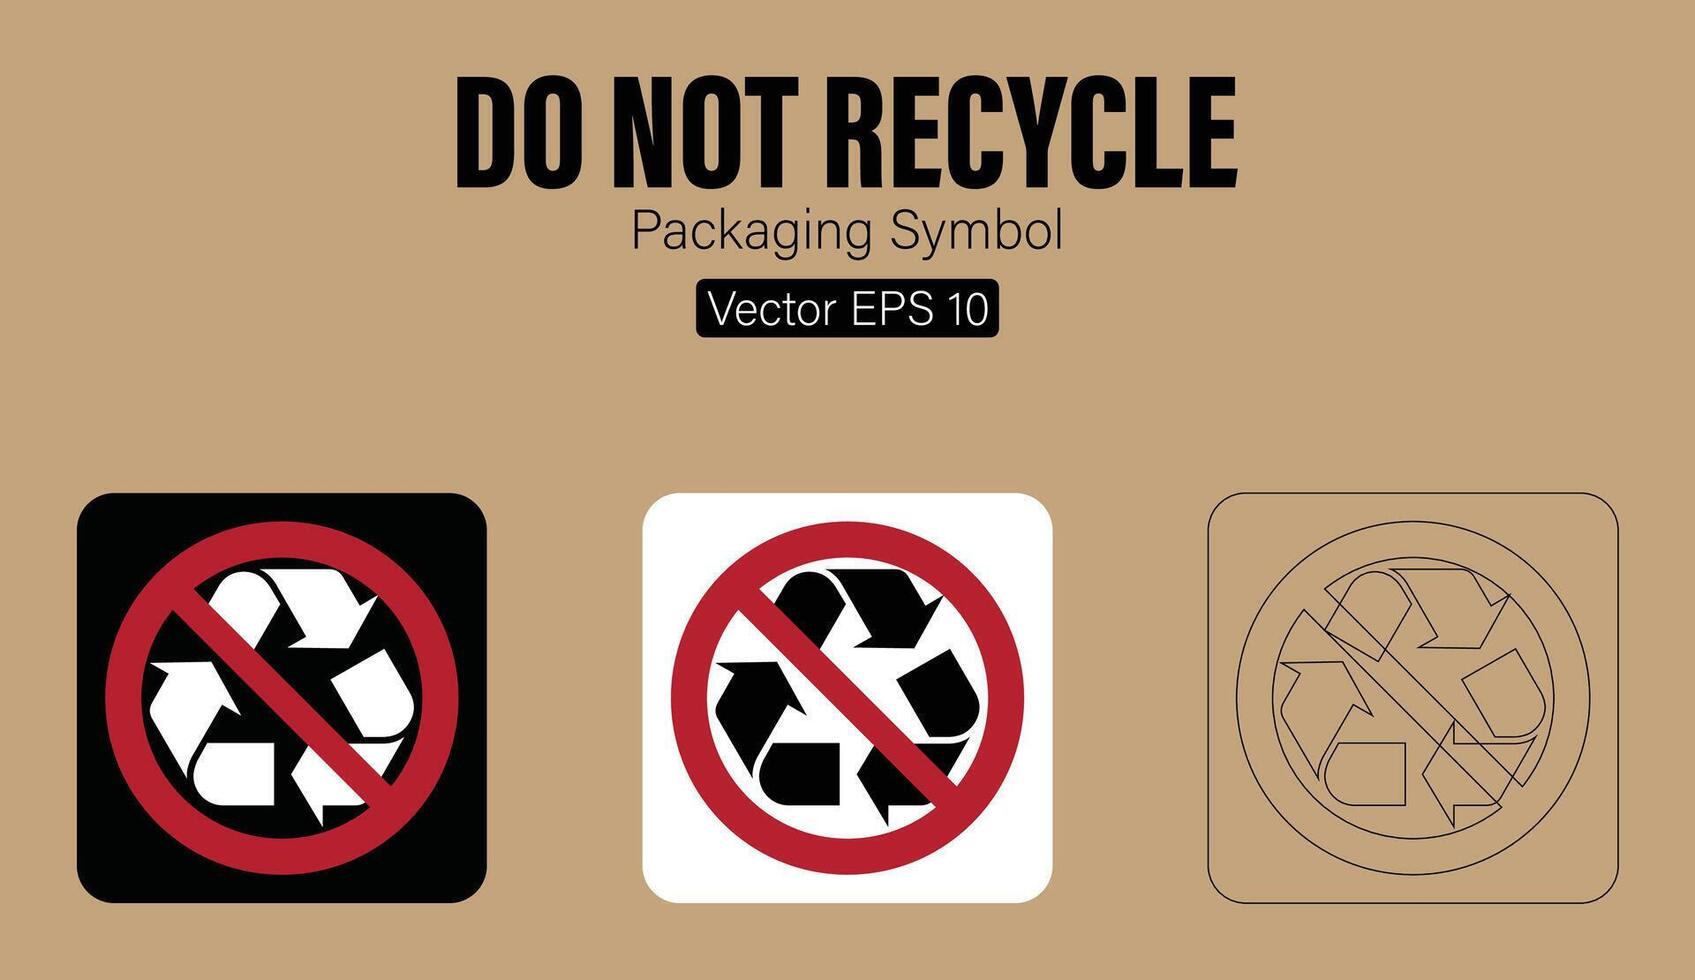 Do Not Recycle Packaging Symbol vector